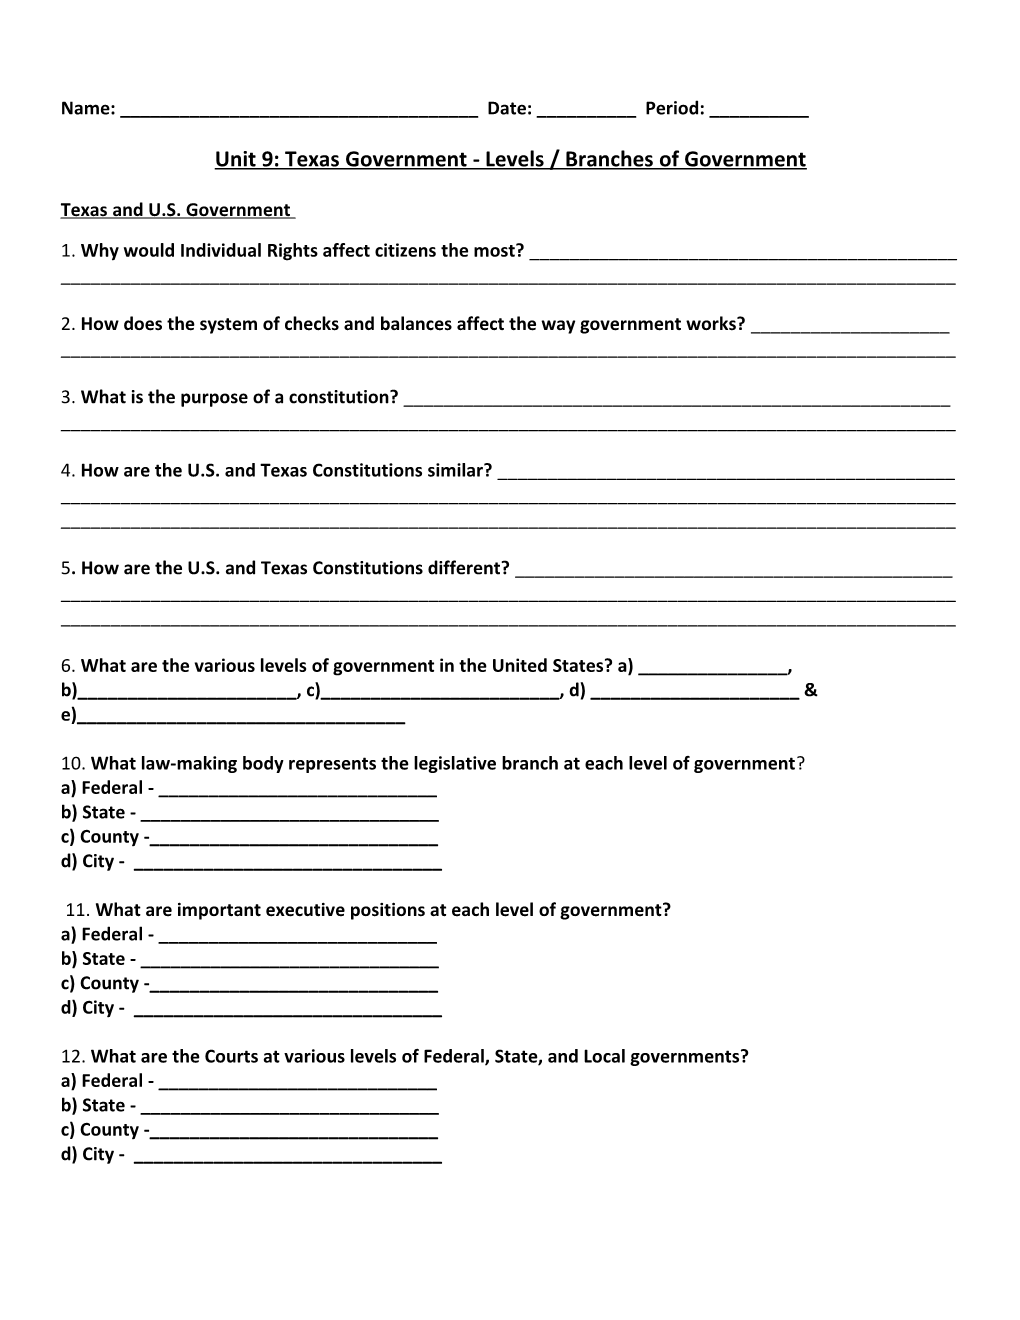 Unit 9: Texas Government - Levels / Branches of Government